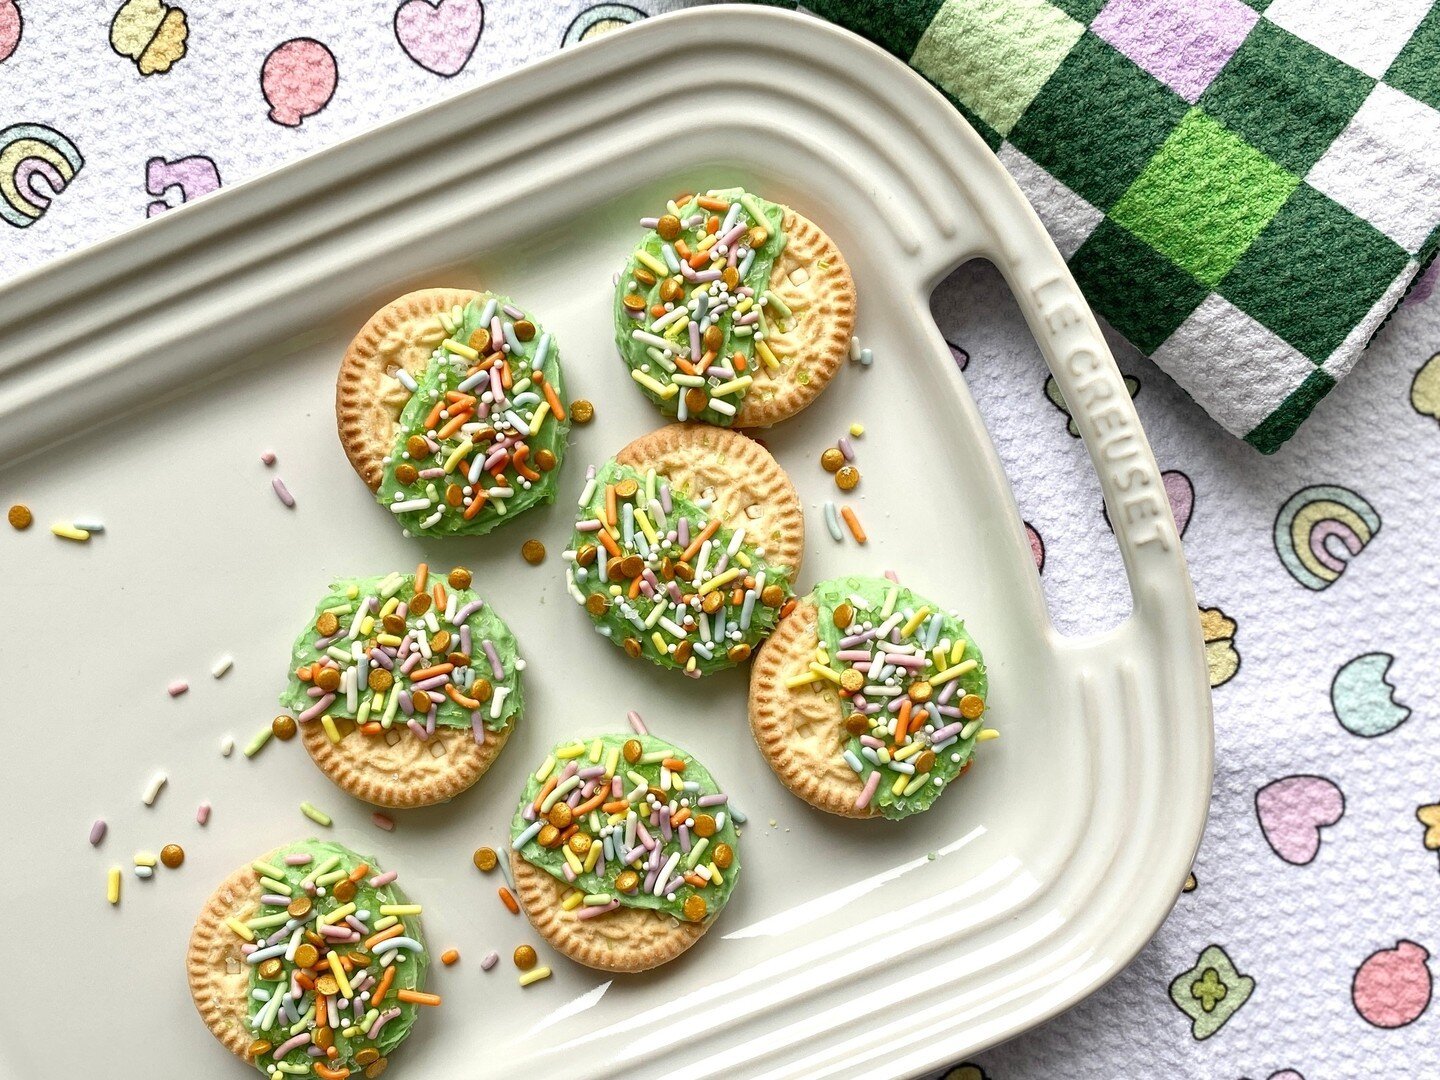 These cute St. Patty's 'End of the Rainbow' Cookies were SO easy to make and totally wowed my little leprechauns. WIN WIN. Link in bio for both the adorable 'recipe' AND for 15% off the adorable Geometry Tea Towels, too. Use DarcieC15 at checkout any